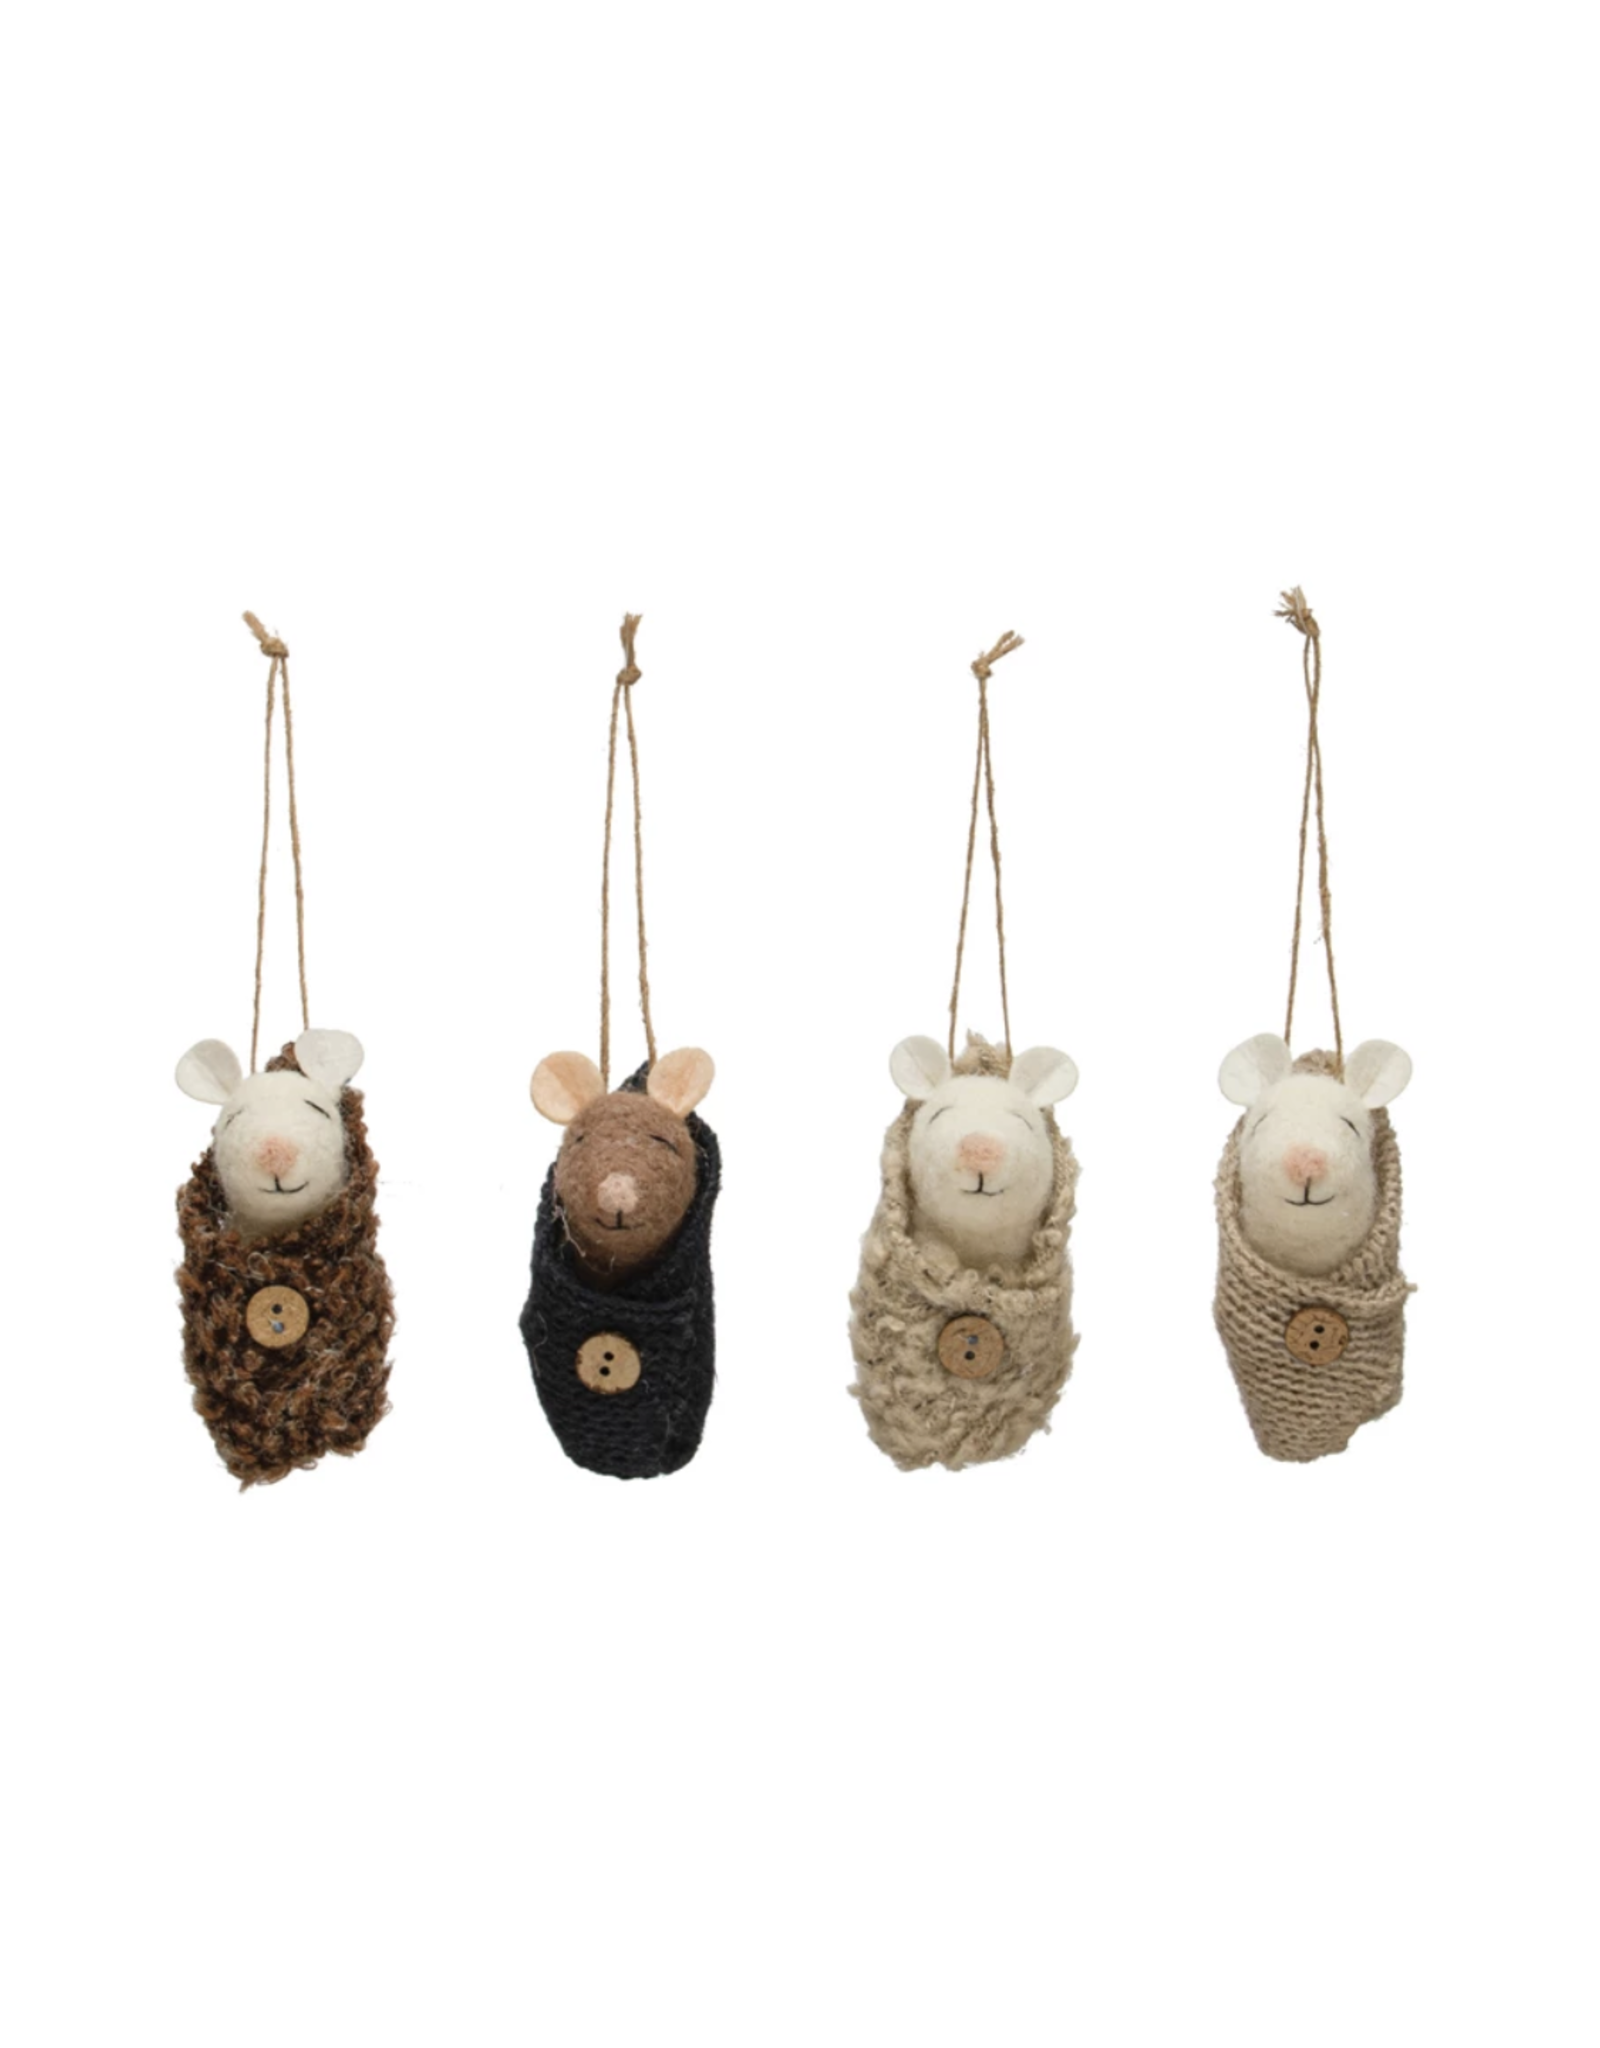 Swaddled Baby Mouse Ornament (Assorted)